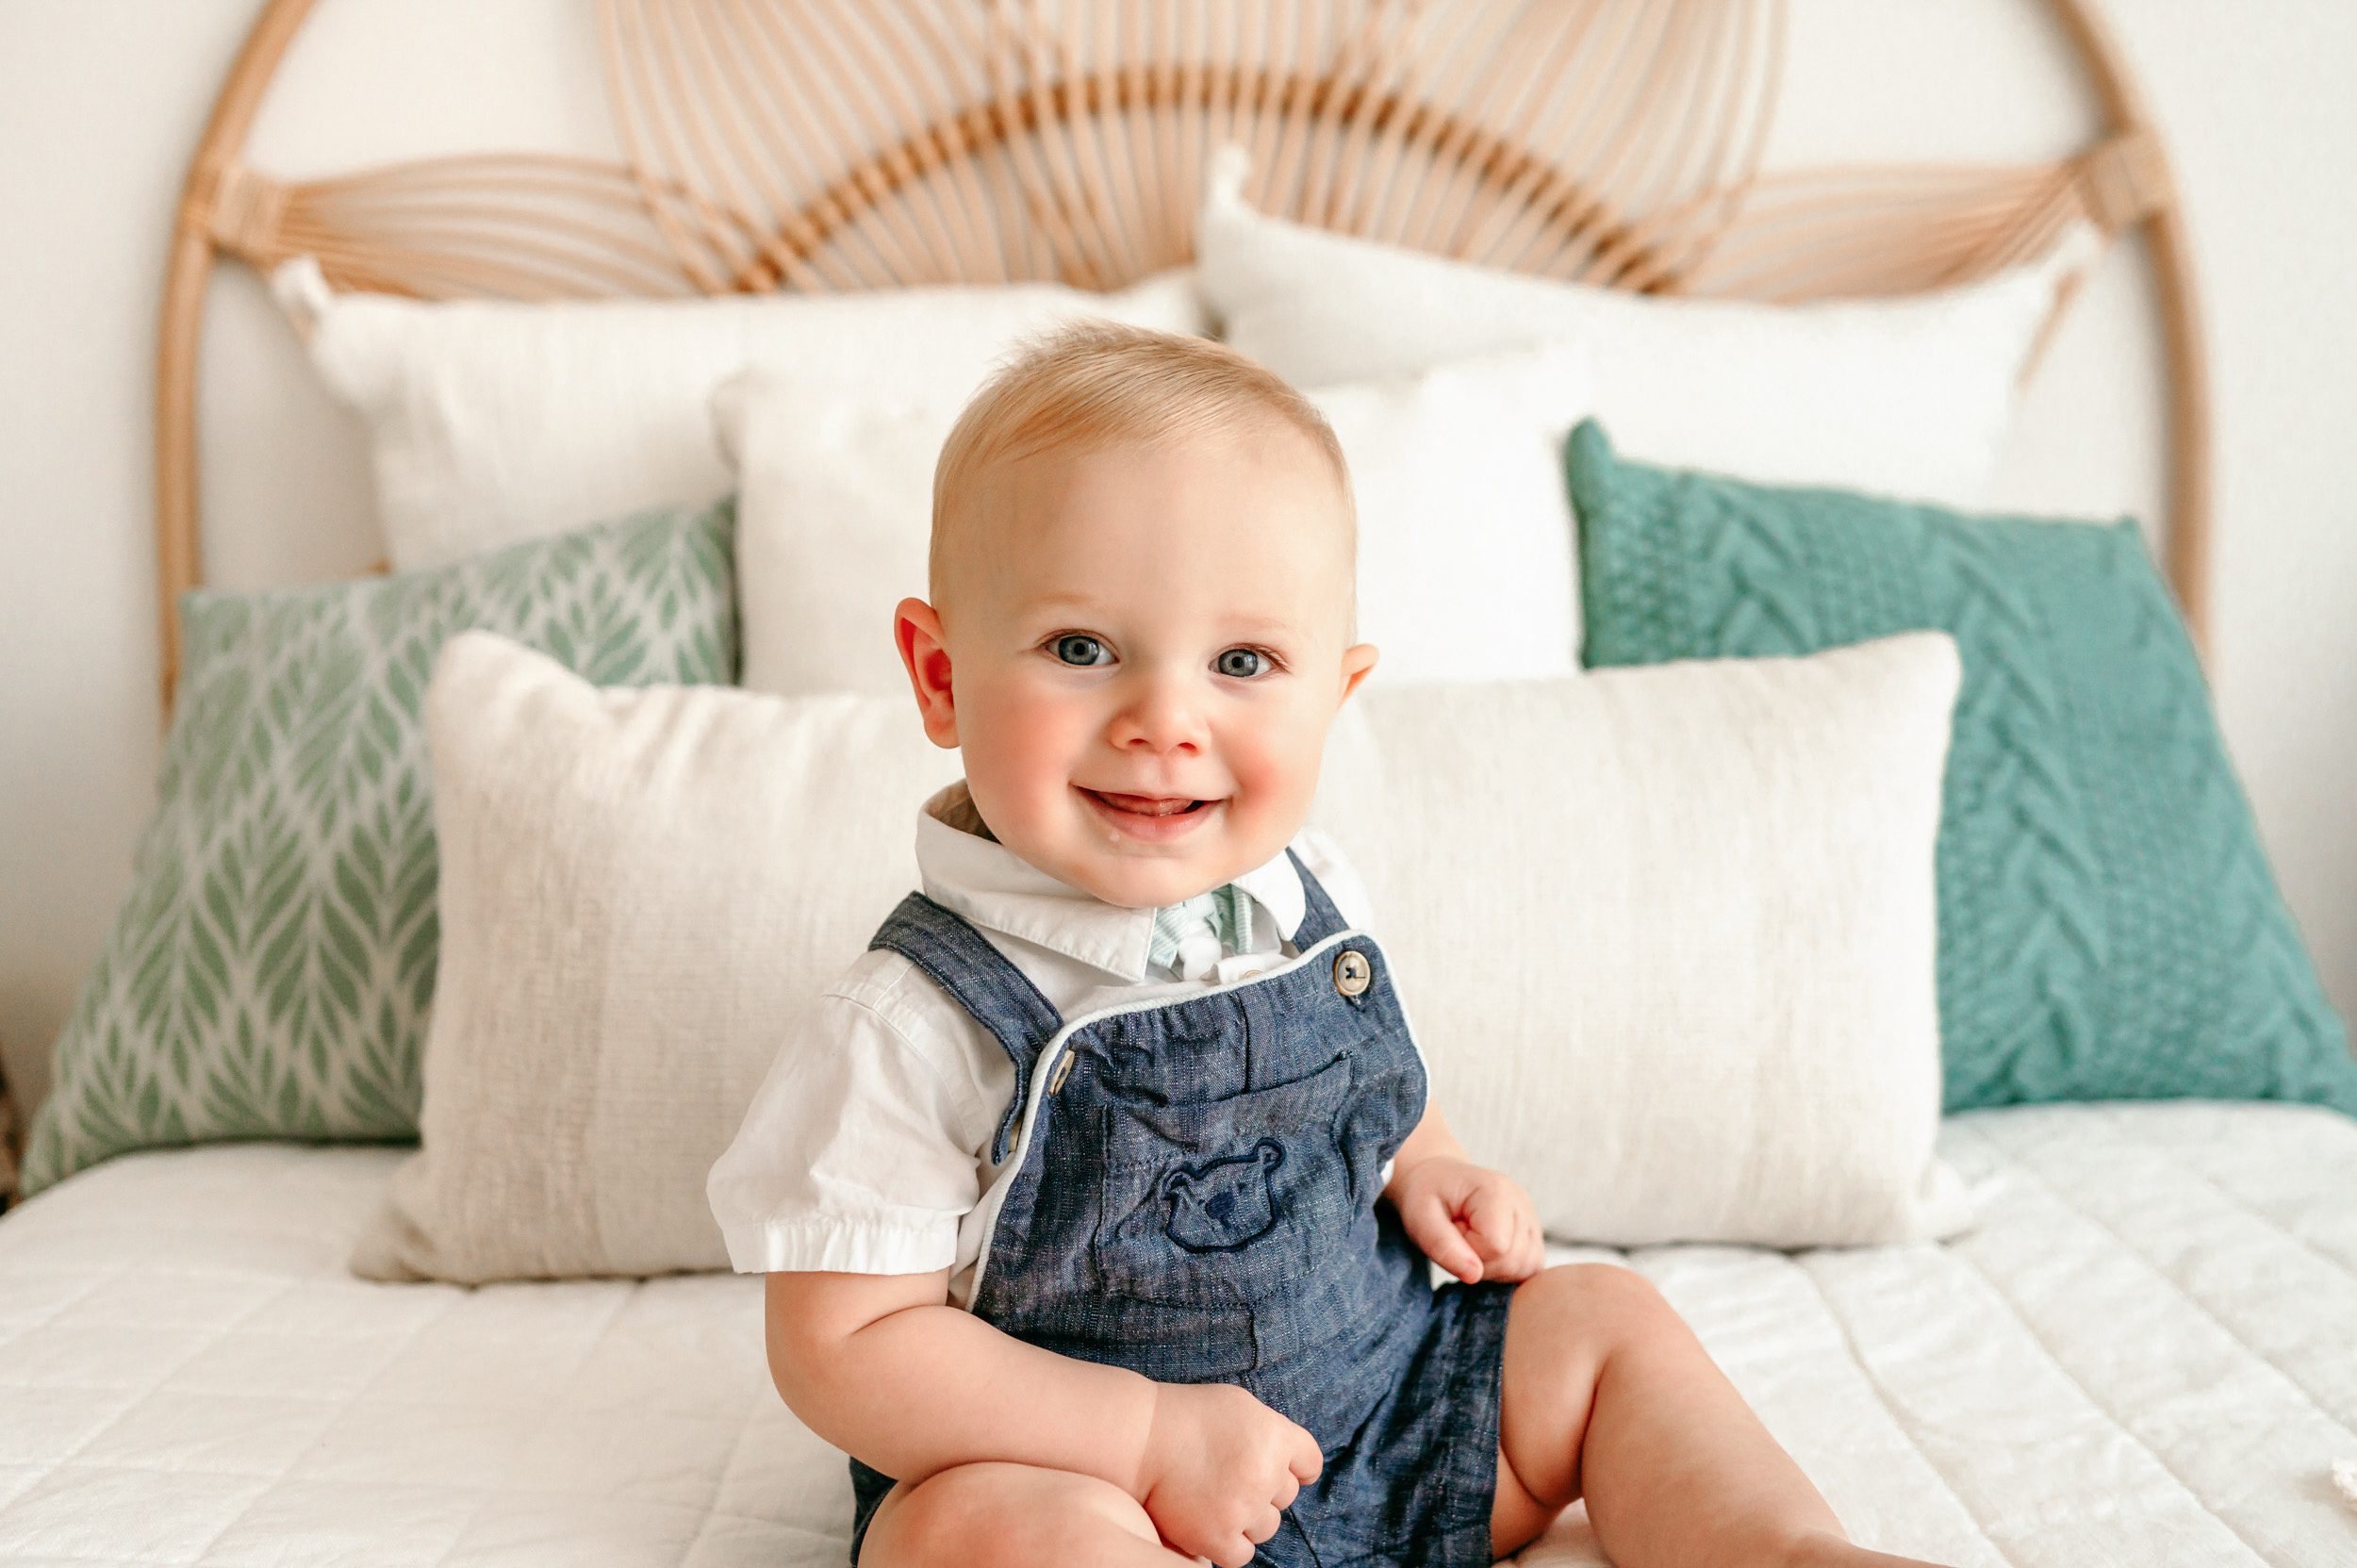 a baby boy sitting on a bed and smiling at the camera during a baby milestone photoshoot